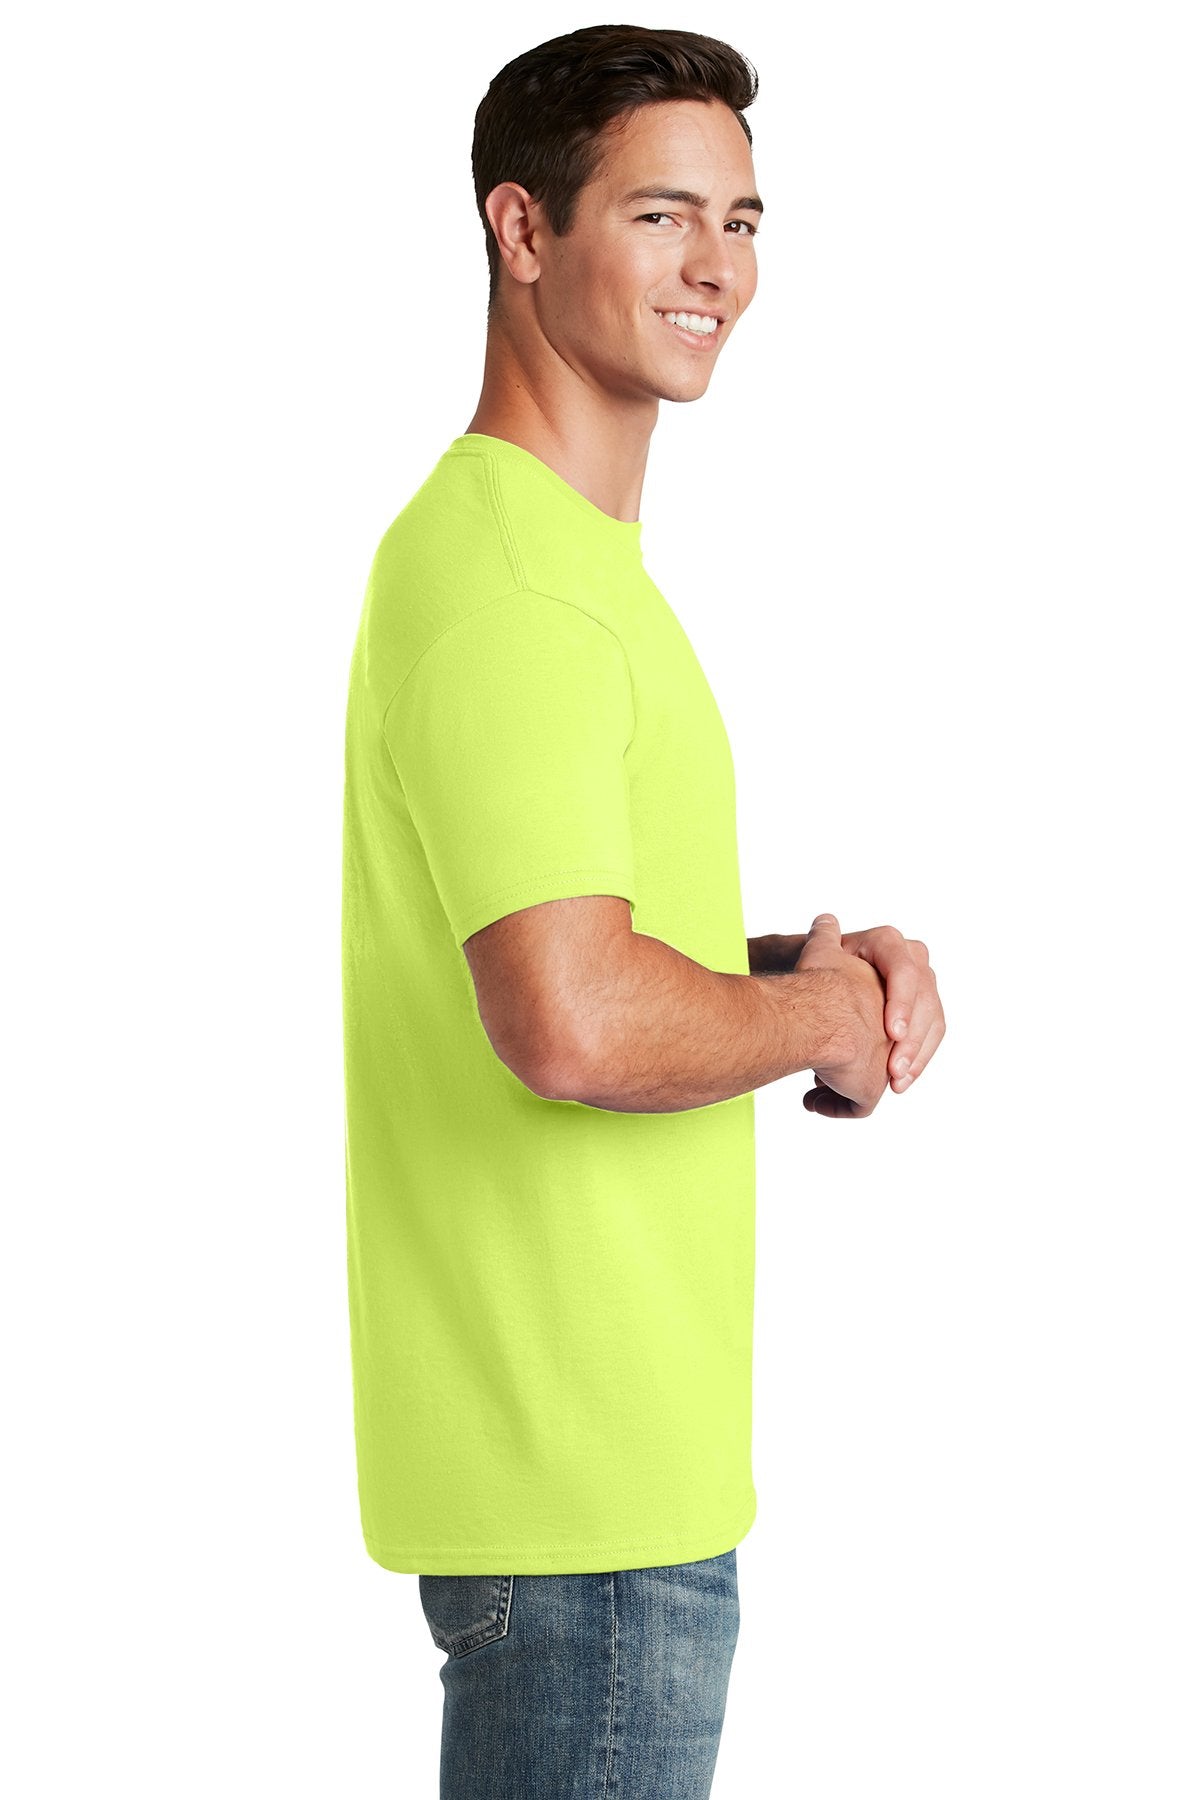 Jerzees Dri-Power Active 50/50 Cotton/Poly T-Shirt 29M Safety Green